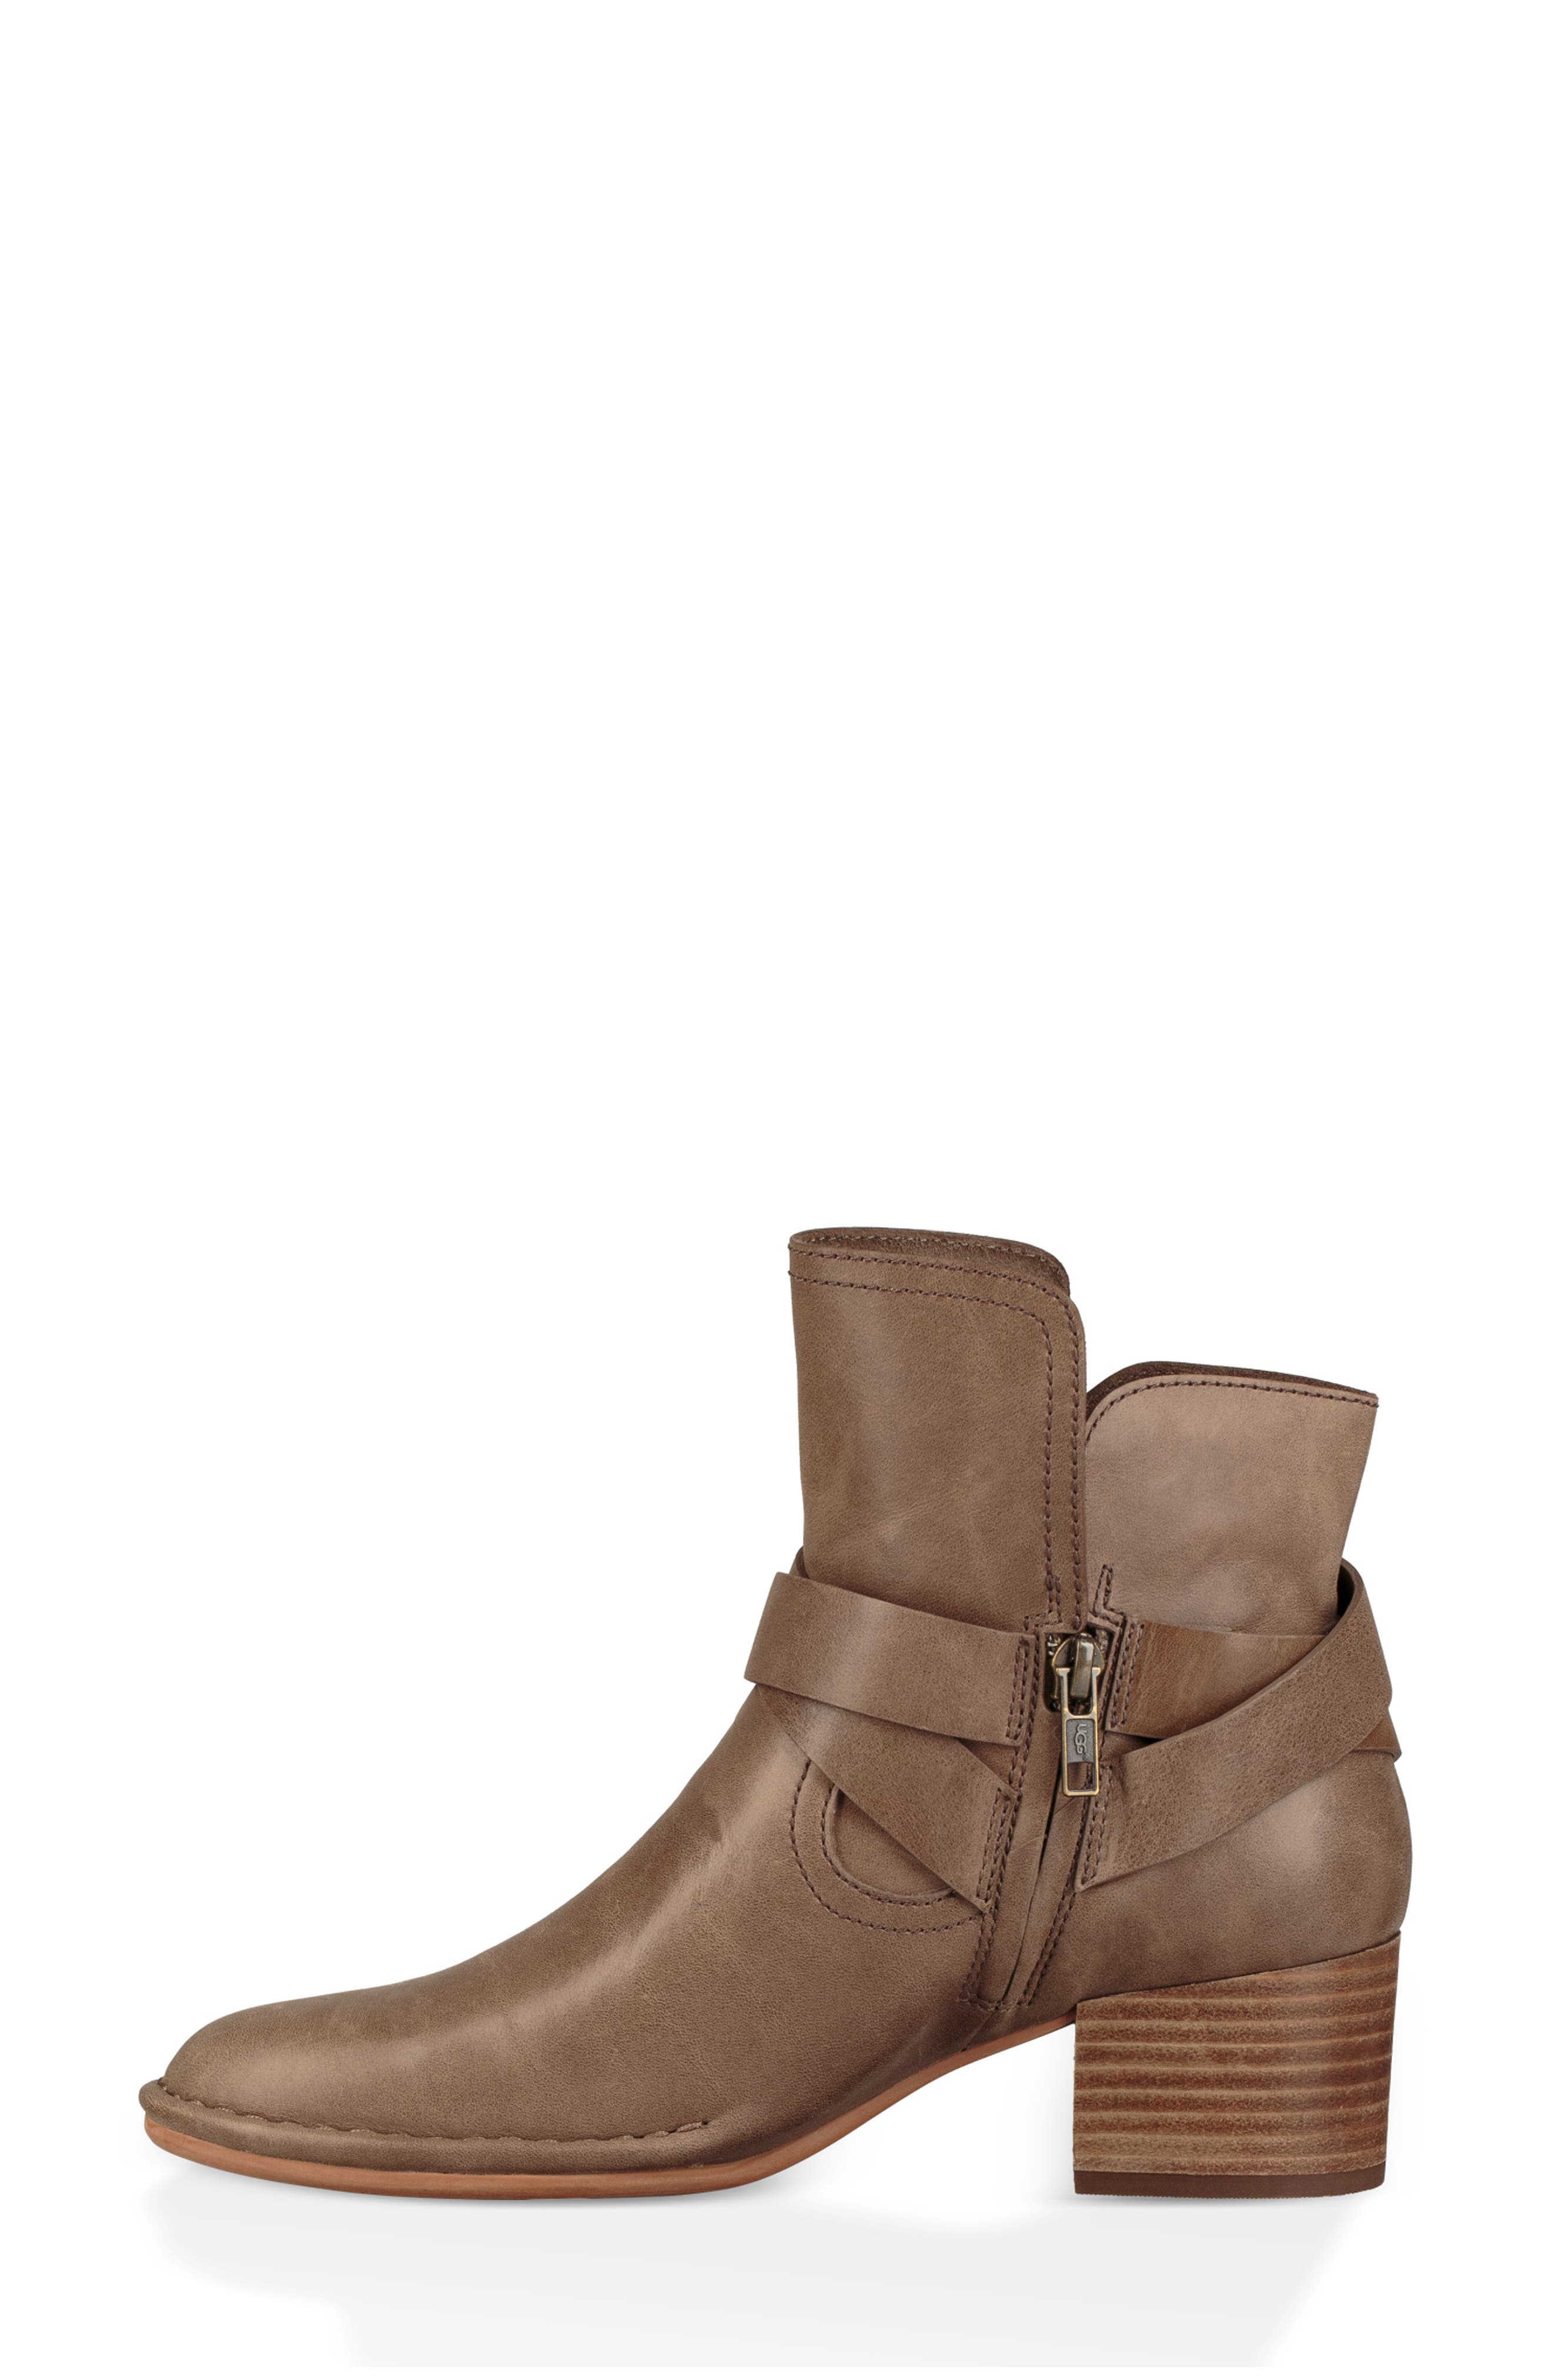 ugg elysian tie ankle boot